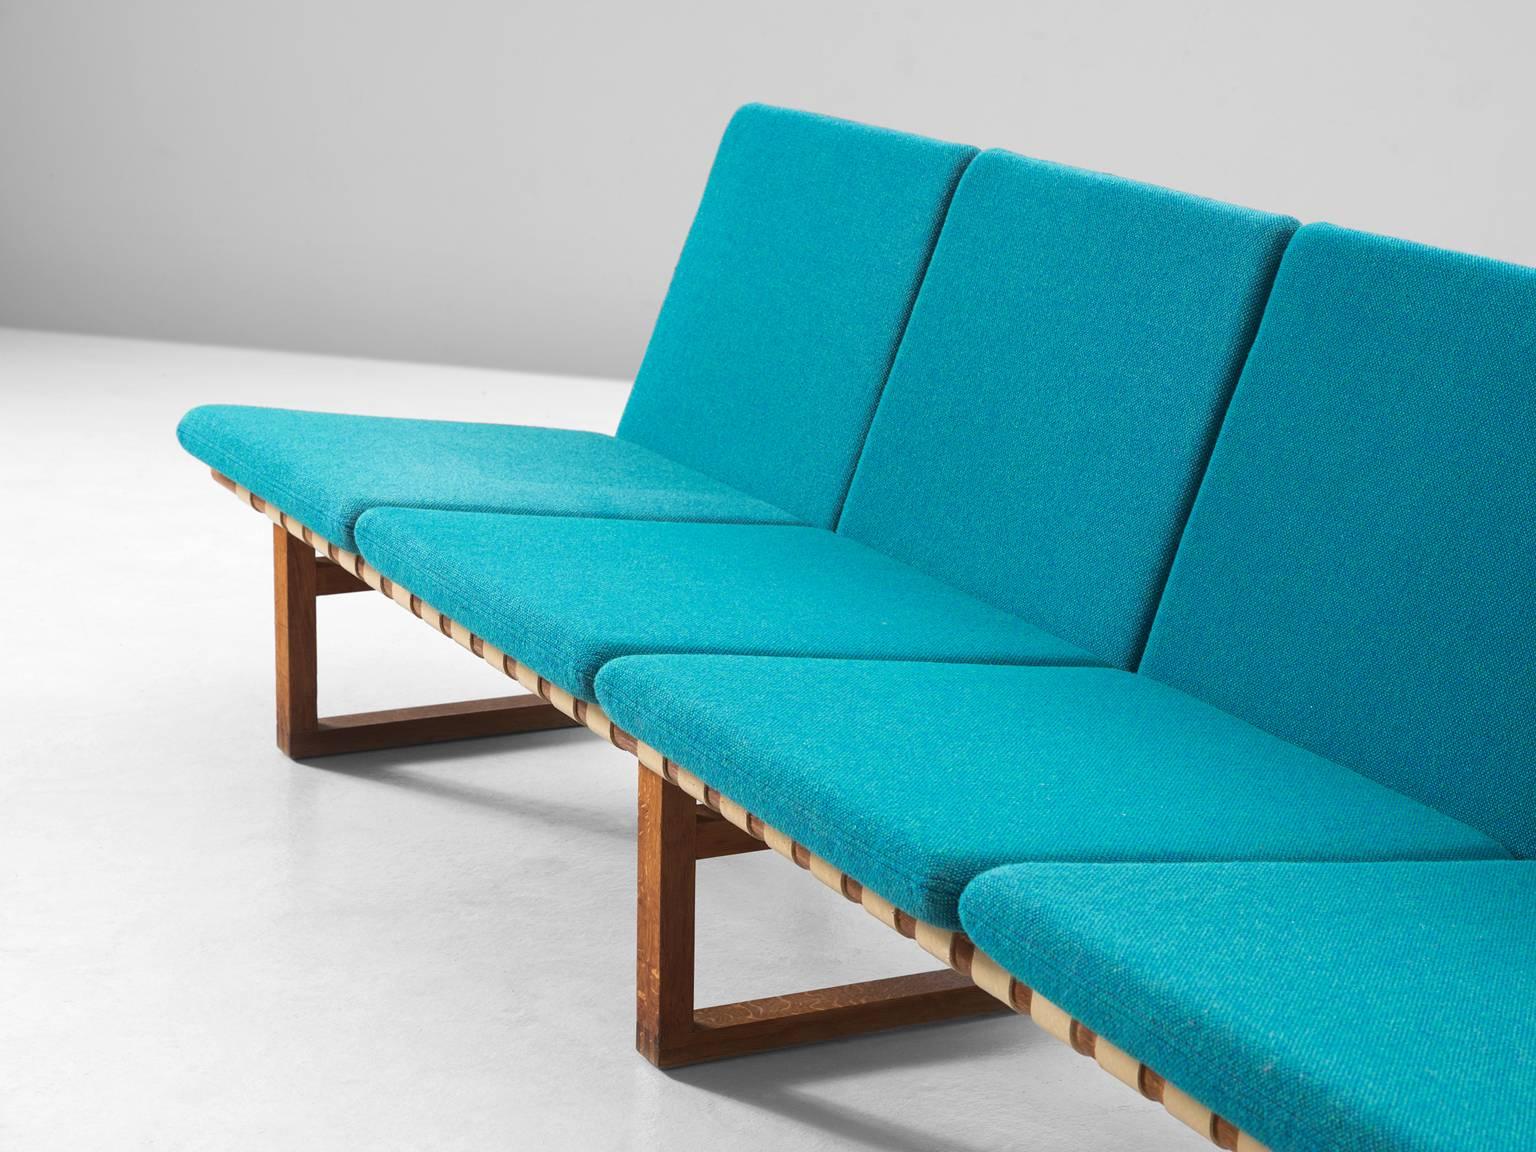 Fabric Børge Mogensen Early Four-Seat Sofa with Petrol Blue Upholstery